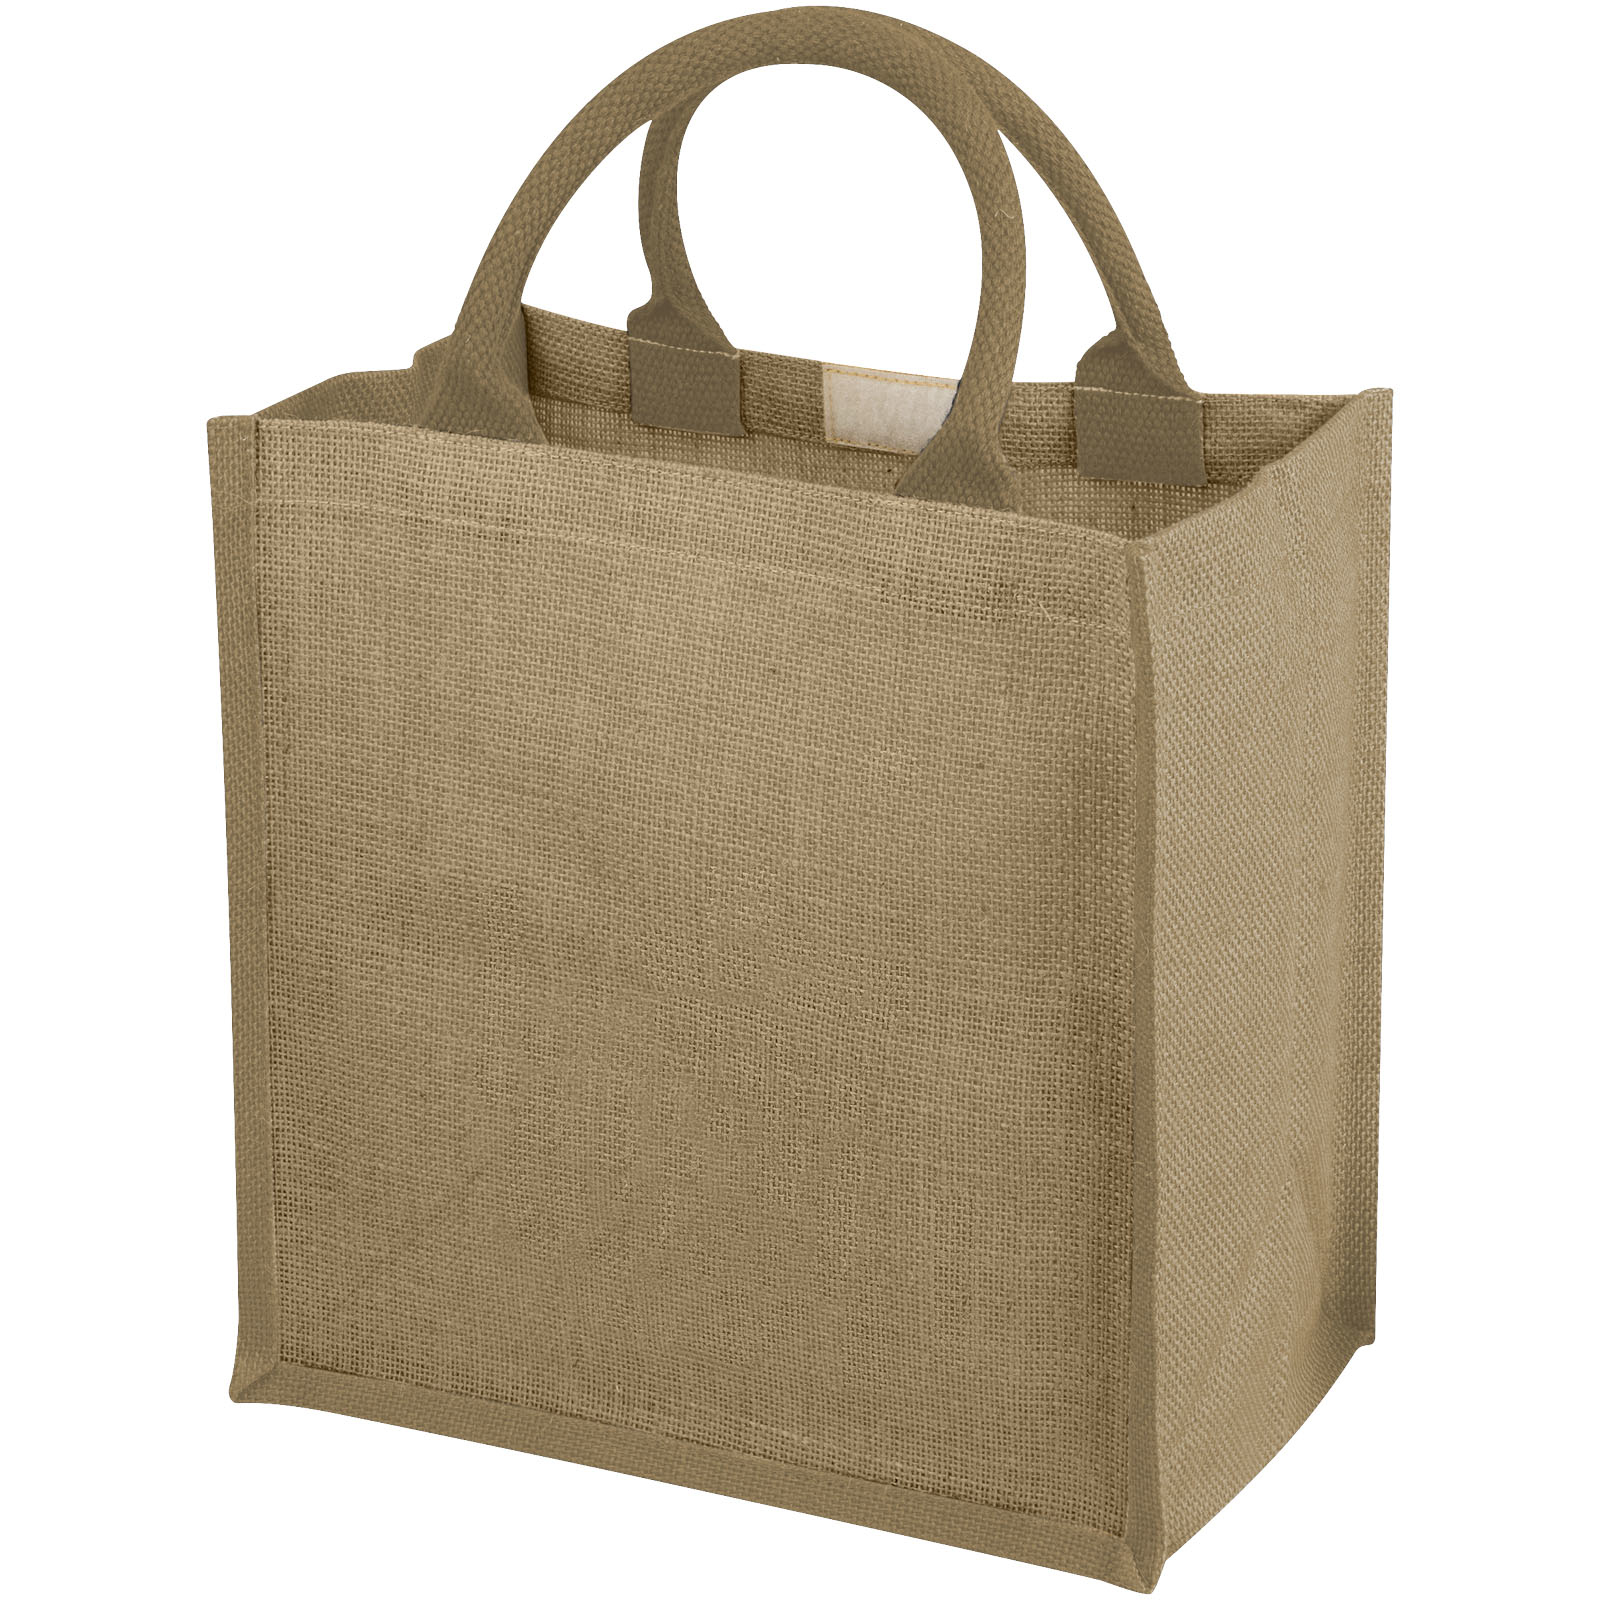 An image of a jute shopper with a natural gusset